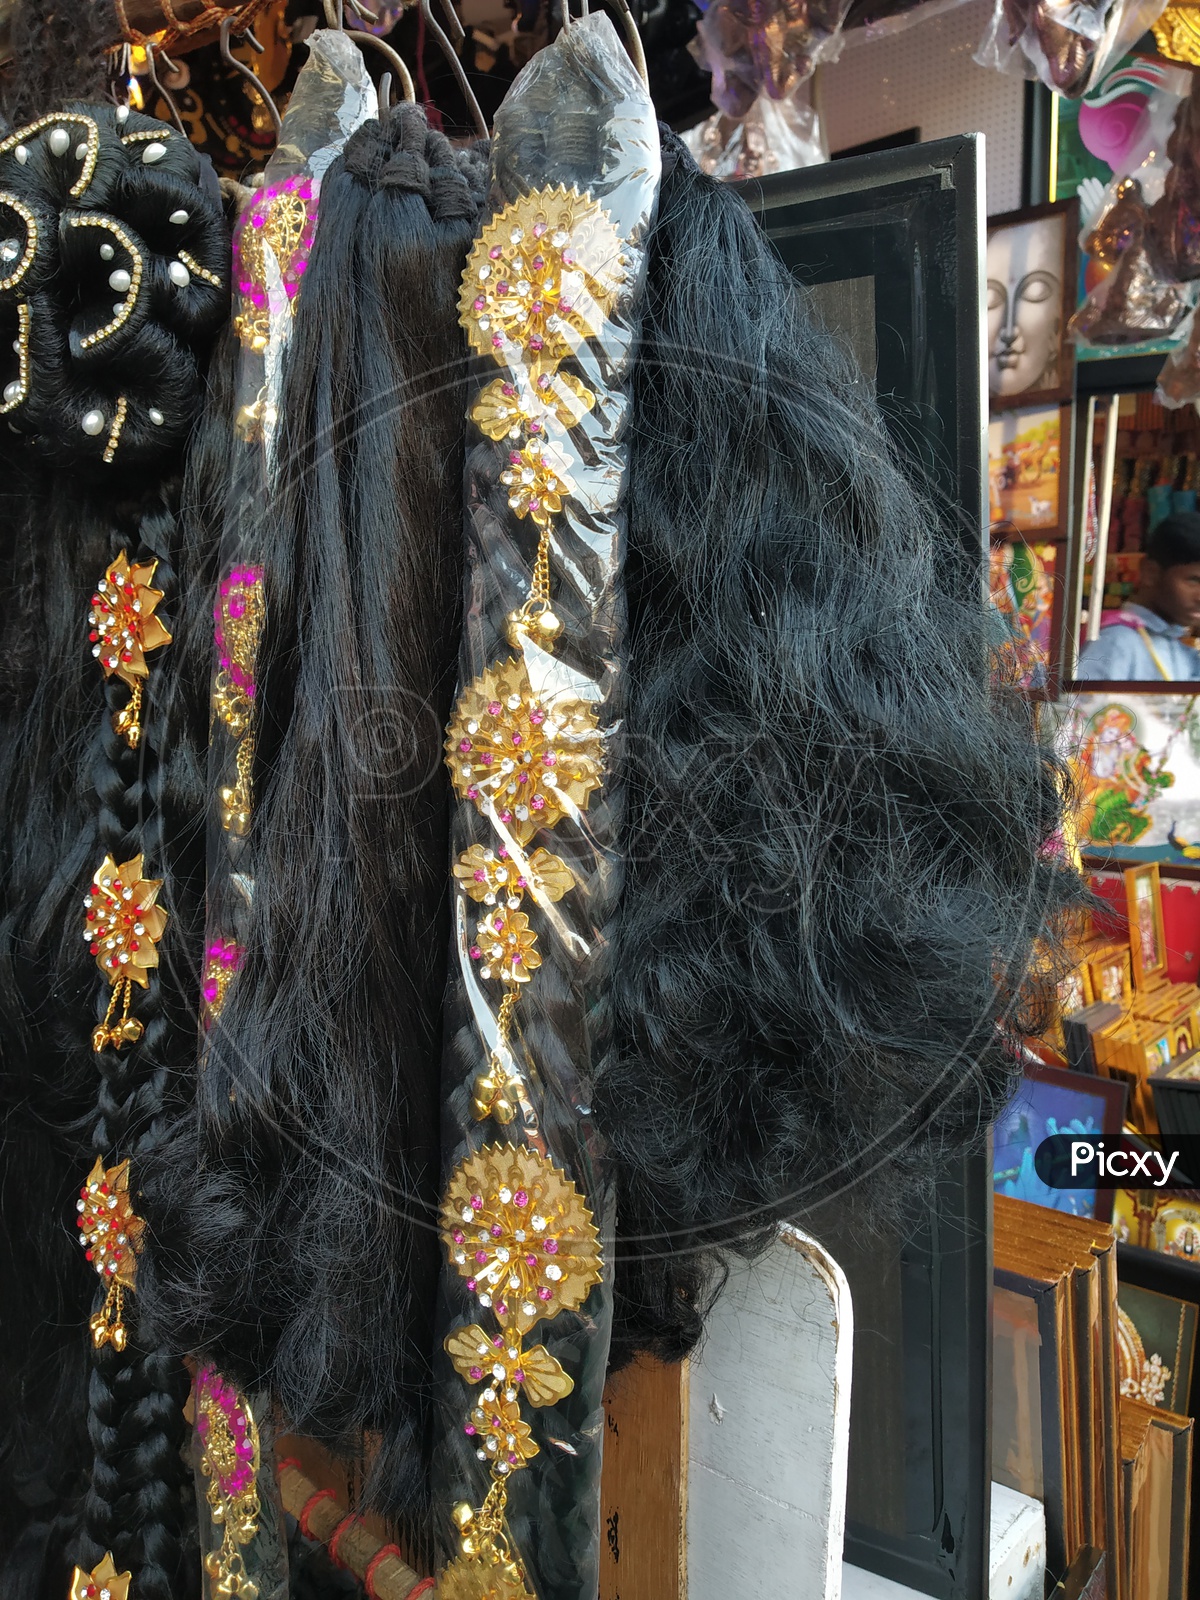 Hair Extension or False Hair Extension or Nylon  Hair Extension  Selling in Shops